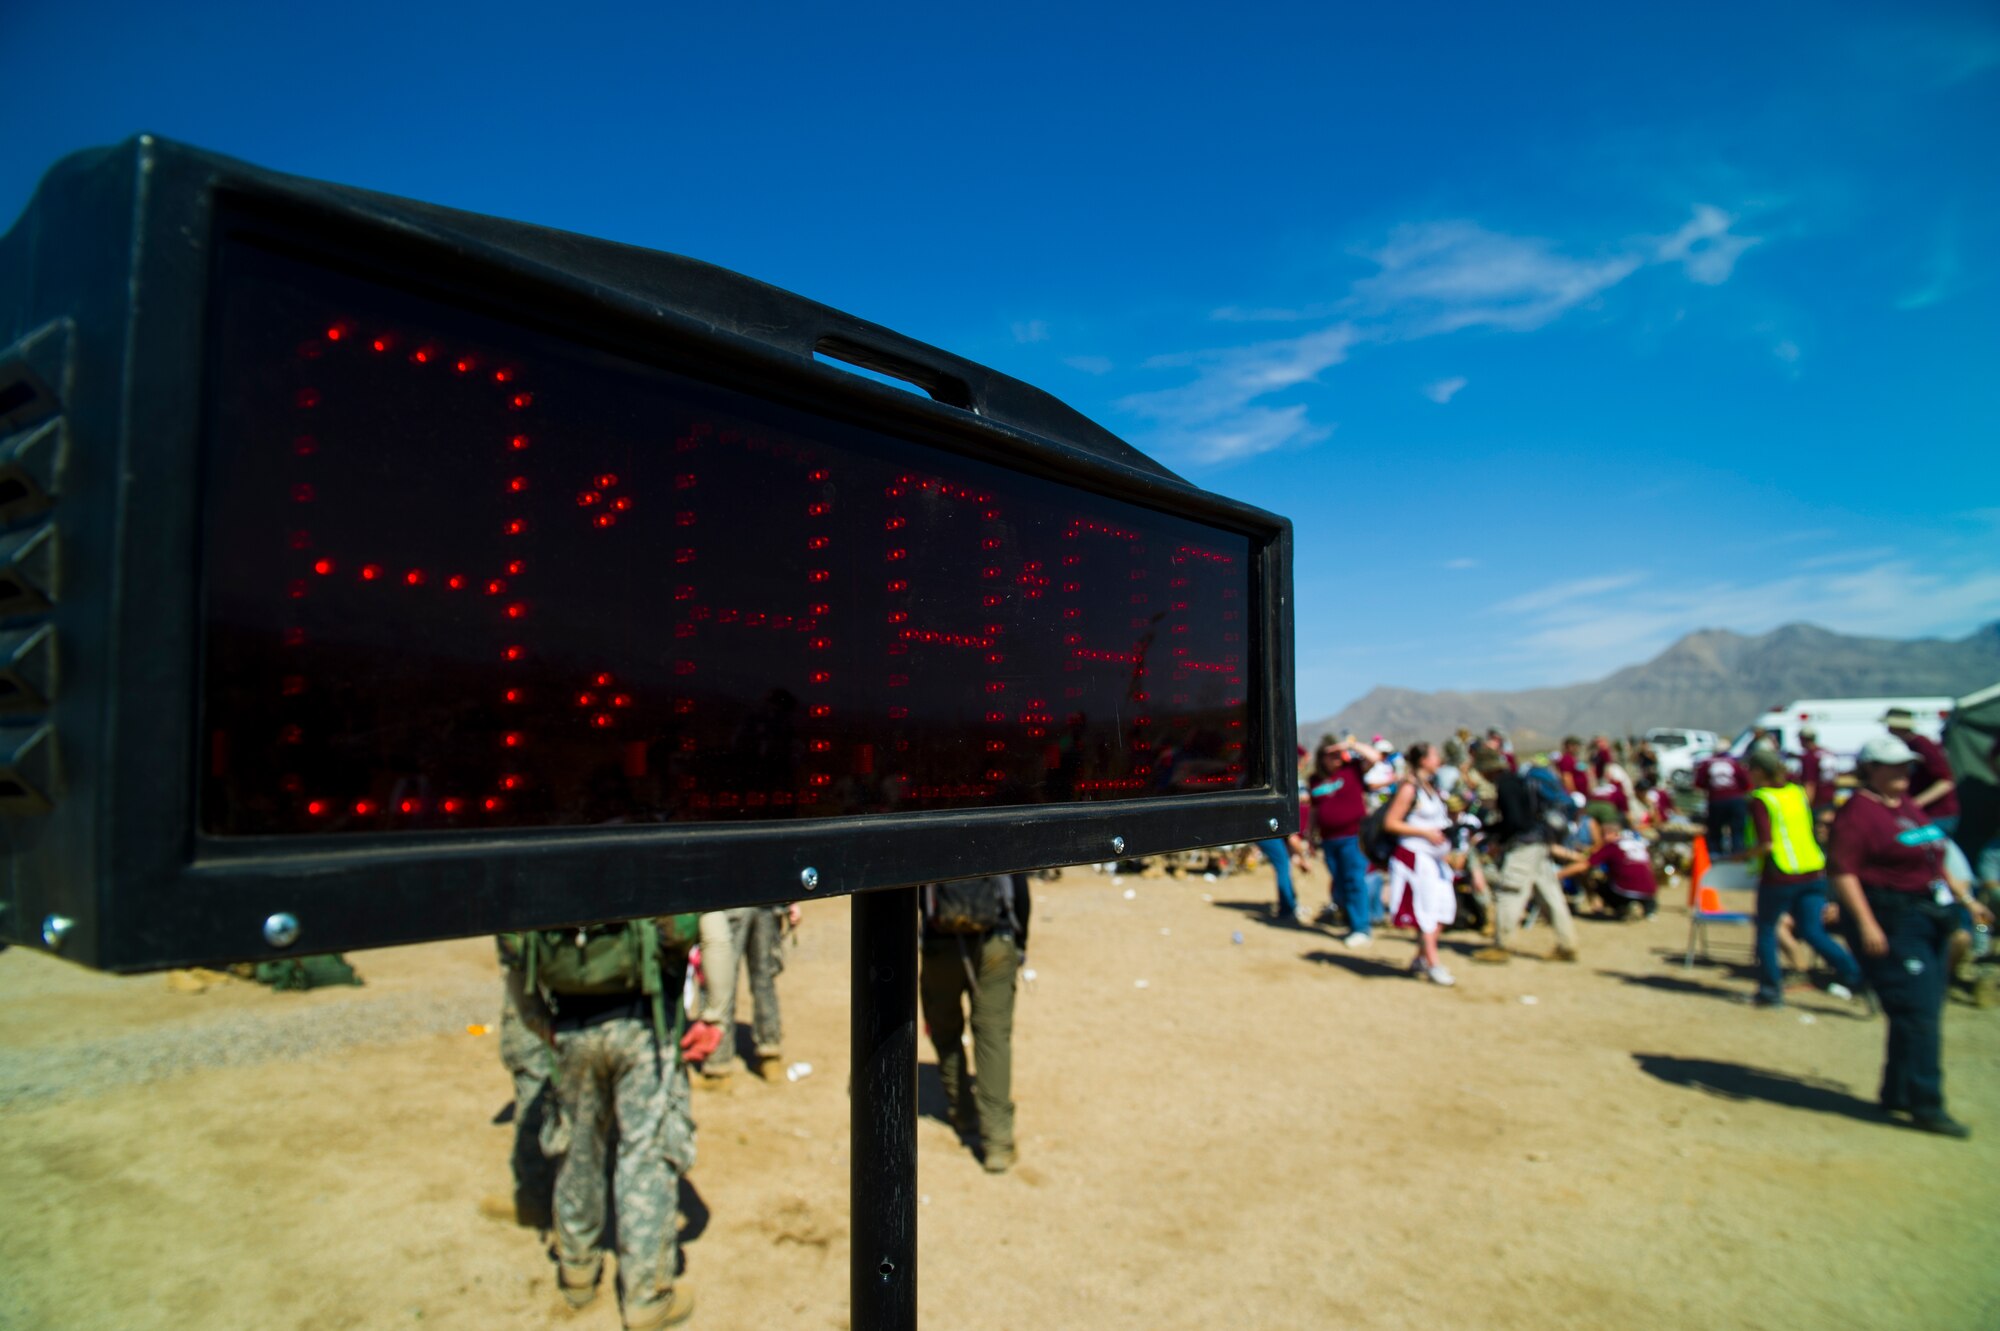 WHITE SANDS MISSILE RANGE, N.M. – A time indicator stands near the halfway point along the course of the Bataan Memorial Death March here March 25. Ken Gordon, 47, of Albuquerque, N.M., finished first with a chip time of 3:18:57. The first female to finish was Pam Nielsen, 35, of Minnetonka, Minn., with a chip time of 3:32:12. Both competed in the civilian - light category. (U.S. Air Force photo by Airman 1st Class Daniel E. Liddicoet/Released)